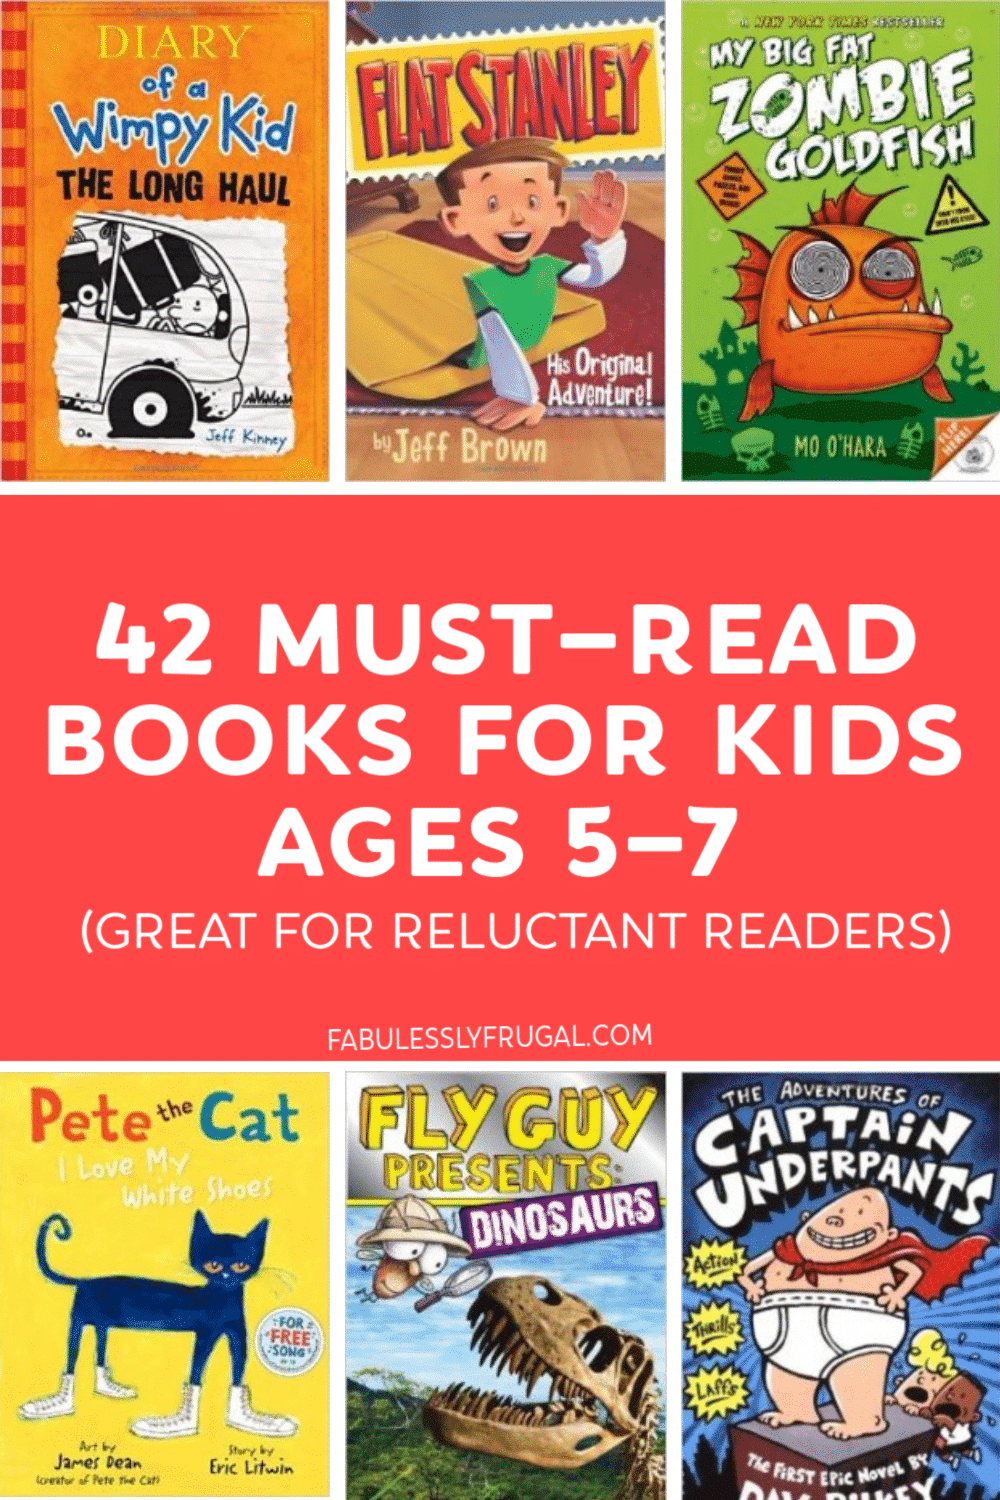 42 must-read books for 5-7 year olds